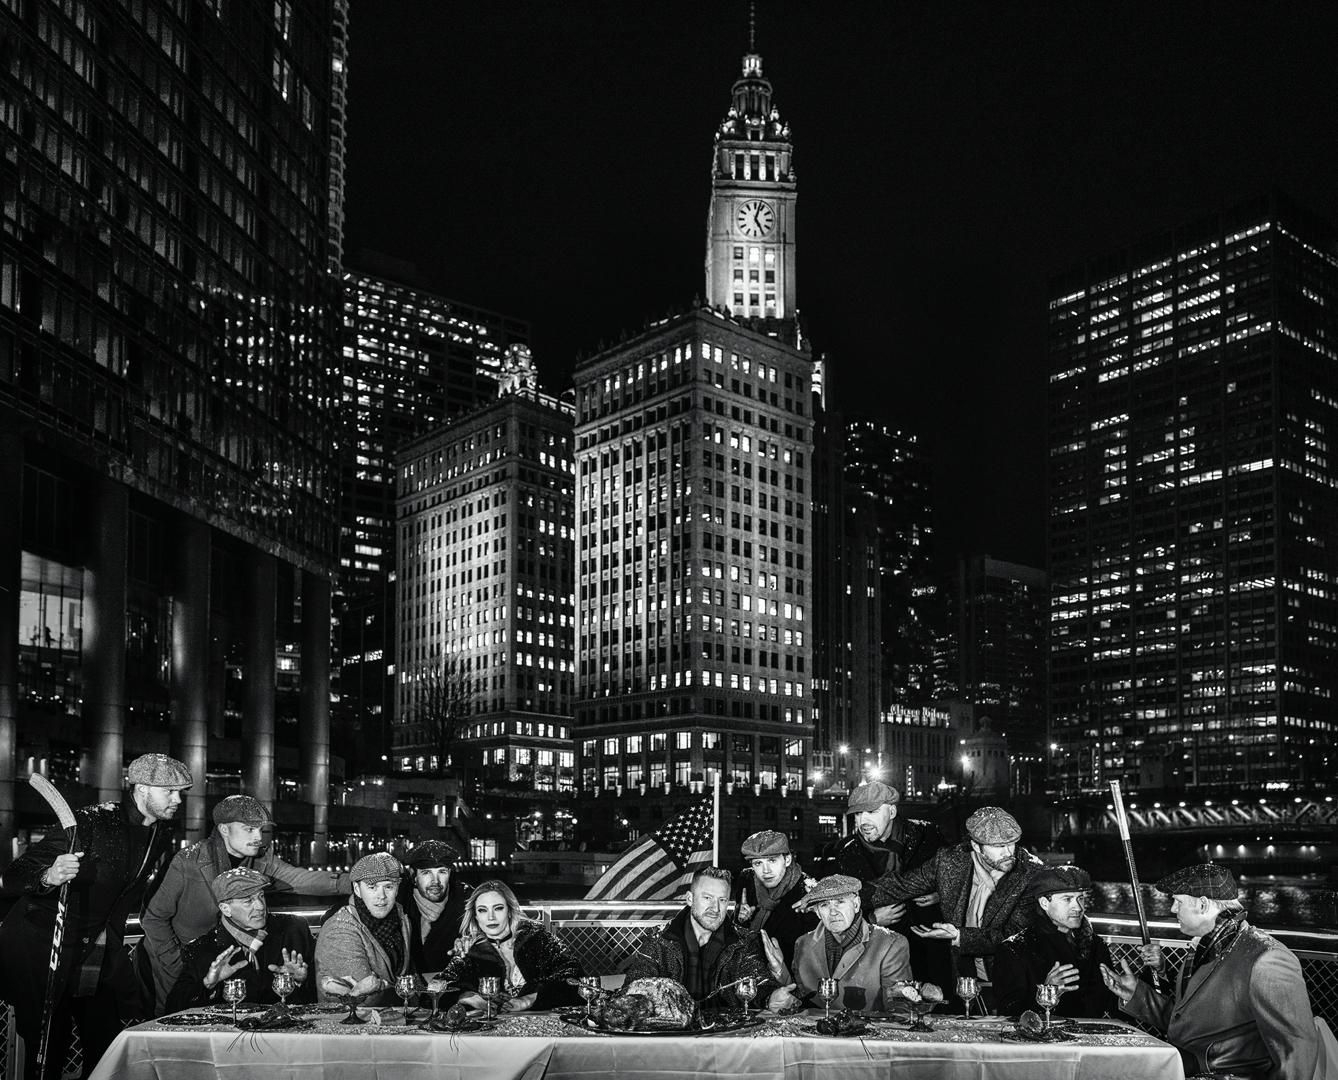 David Yarrow Black and White Photograph - The Last Supper in Chicago